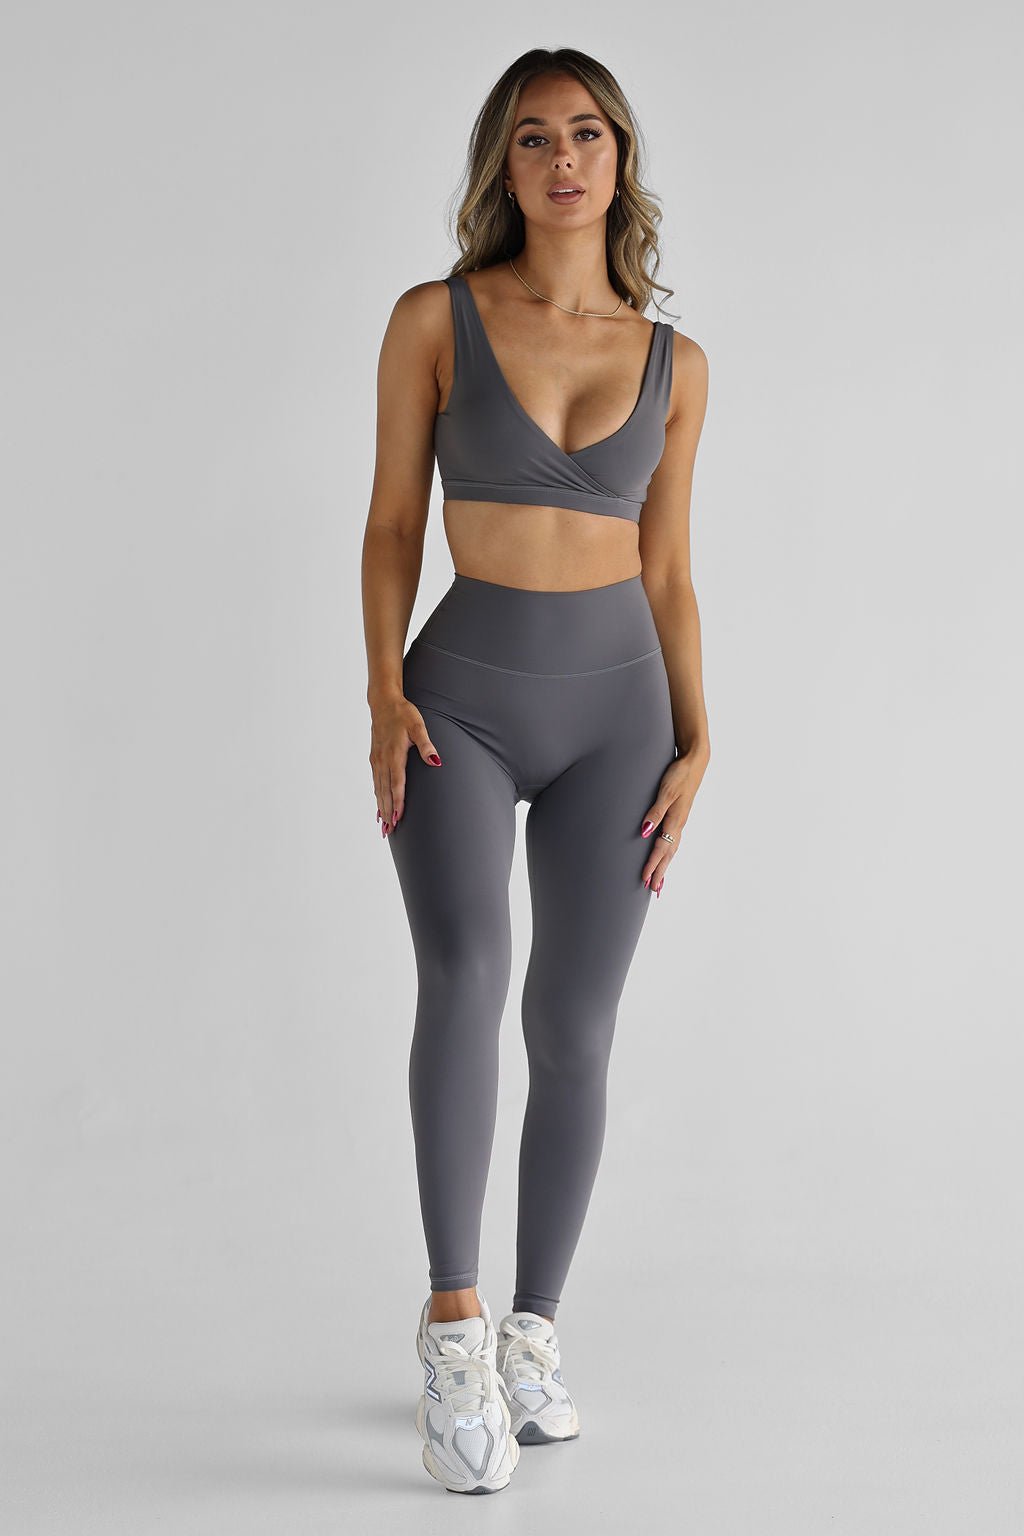 SCULPT Full Length Leggings - Charcoal (SHIPPING FROM 9/06) - LEELO ACTIVE